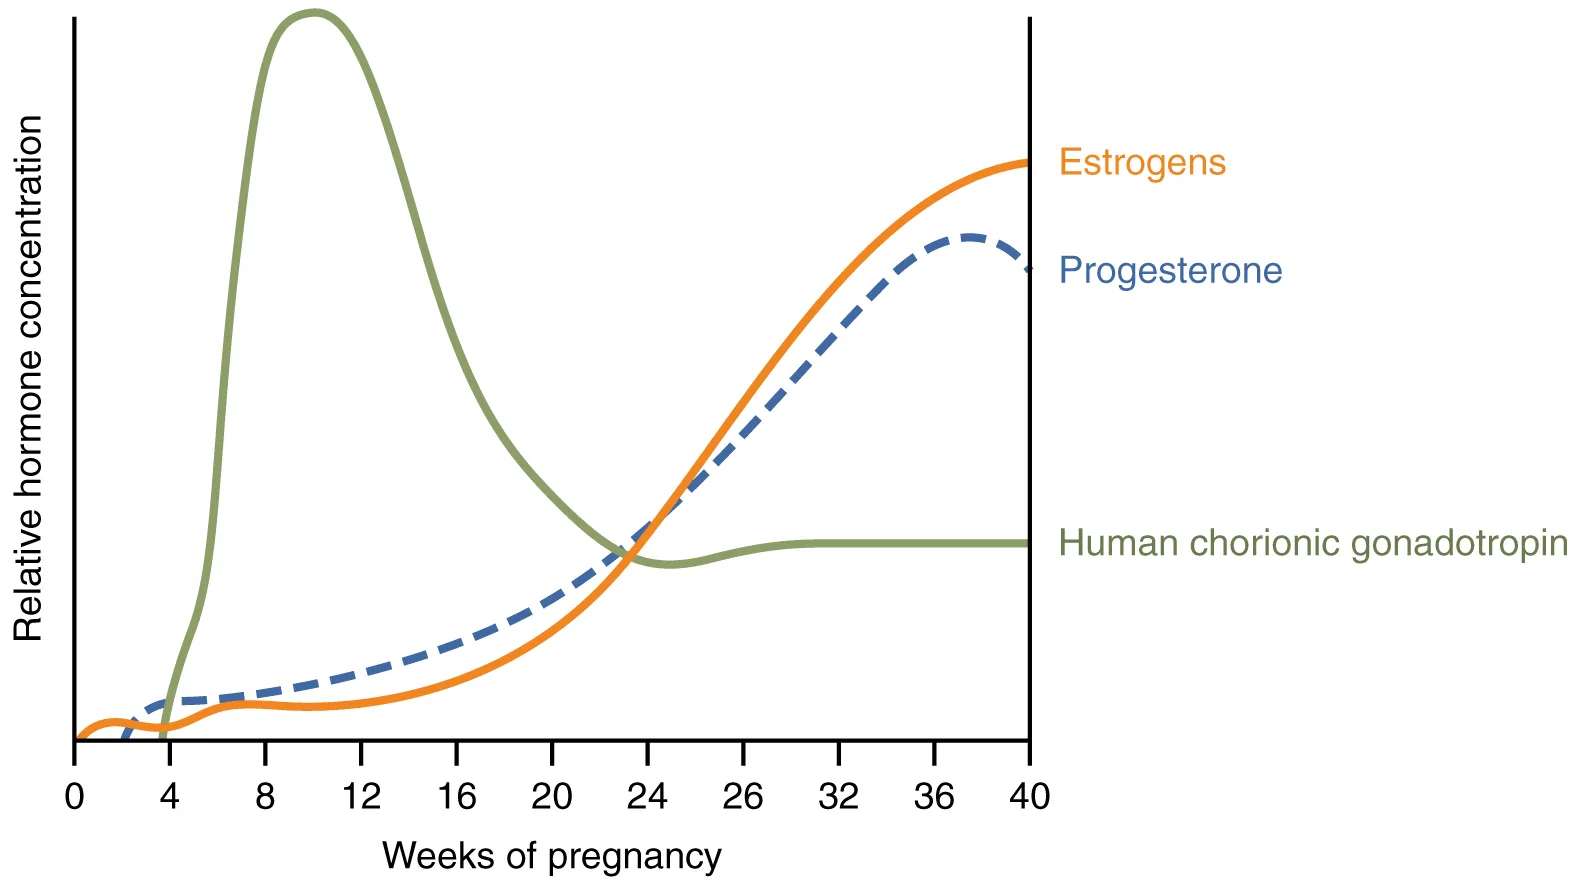 A graph hormone concentration versus week of pregnancy shows how three hormones vary throughout pregnancy.